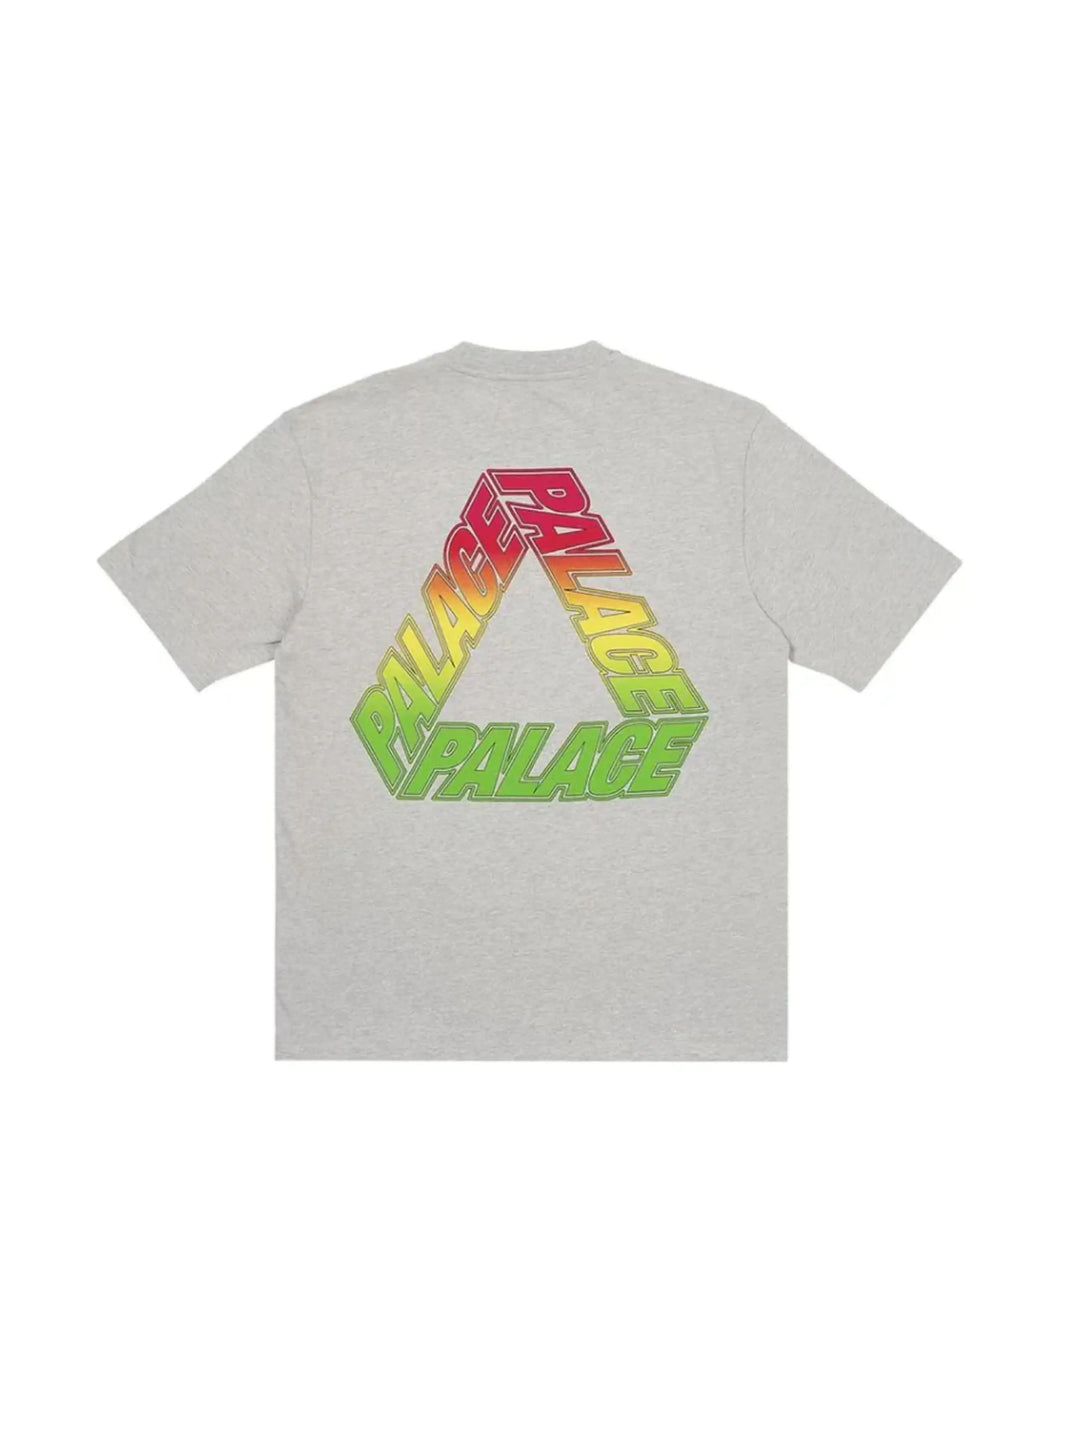 Palace Spectrum P3 T-Shirt Grey Marl in Auckland, New Zealand - Shop name